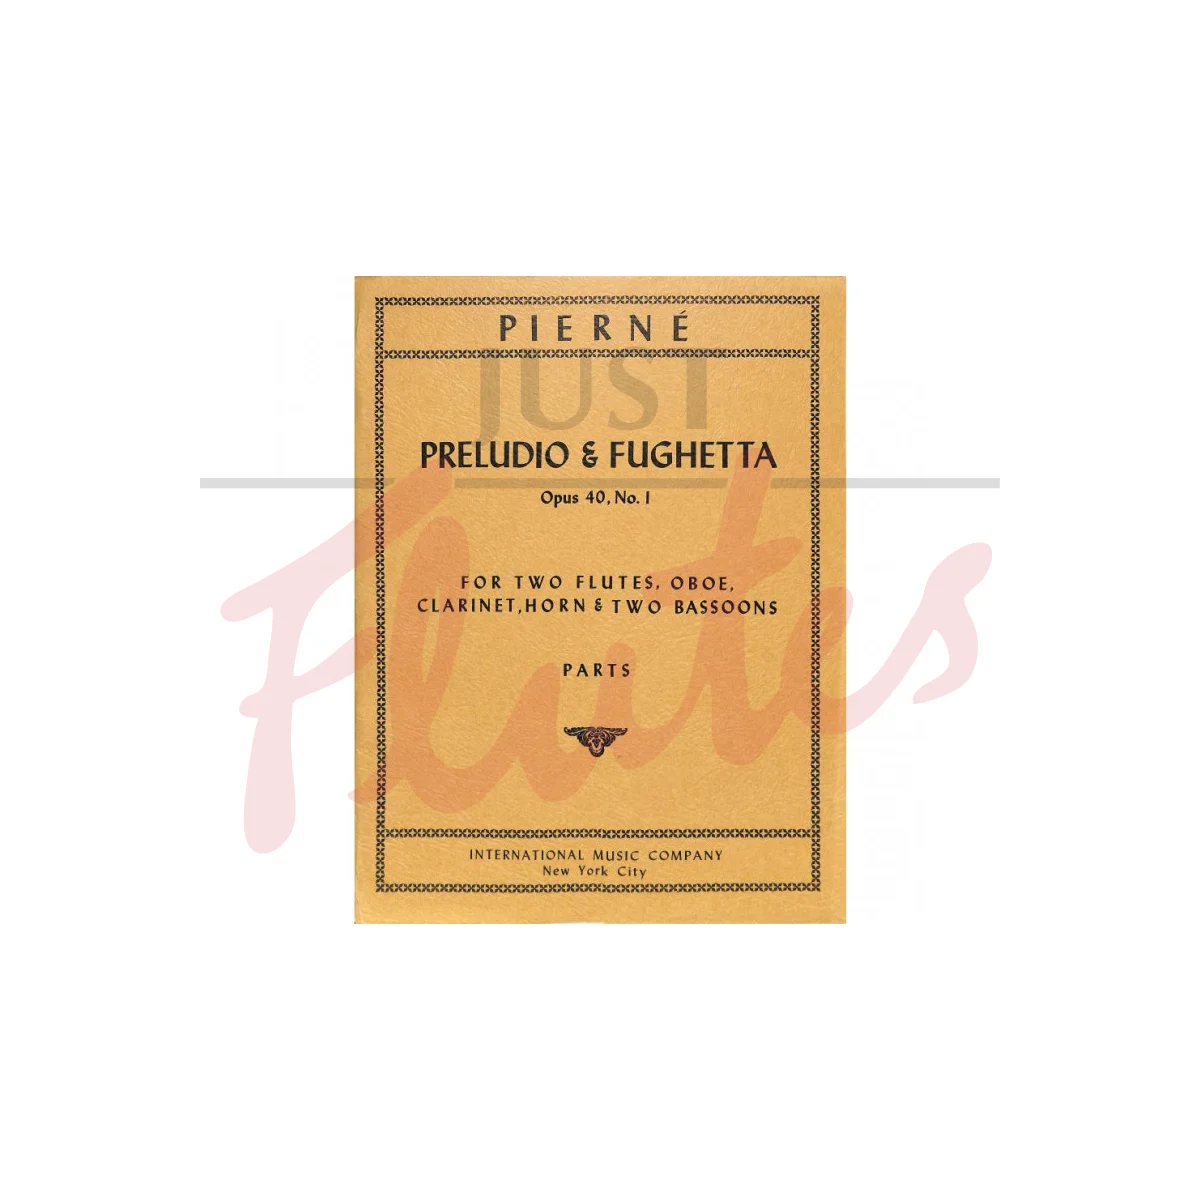 Preludio and Fughetta for Two Flutes, Oboe, Clarinet, Horn and Two Bassoons